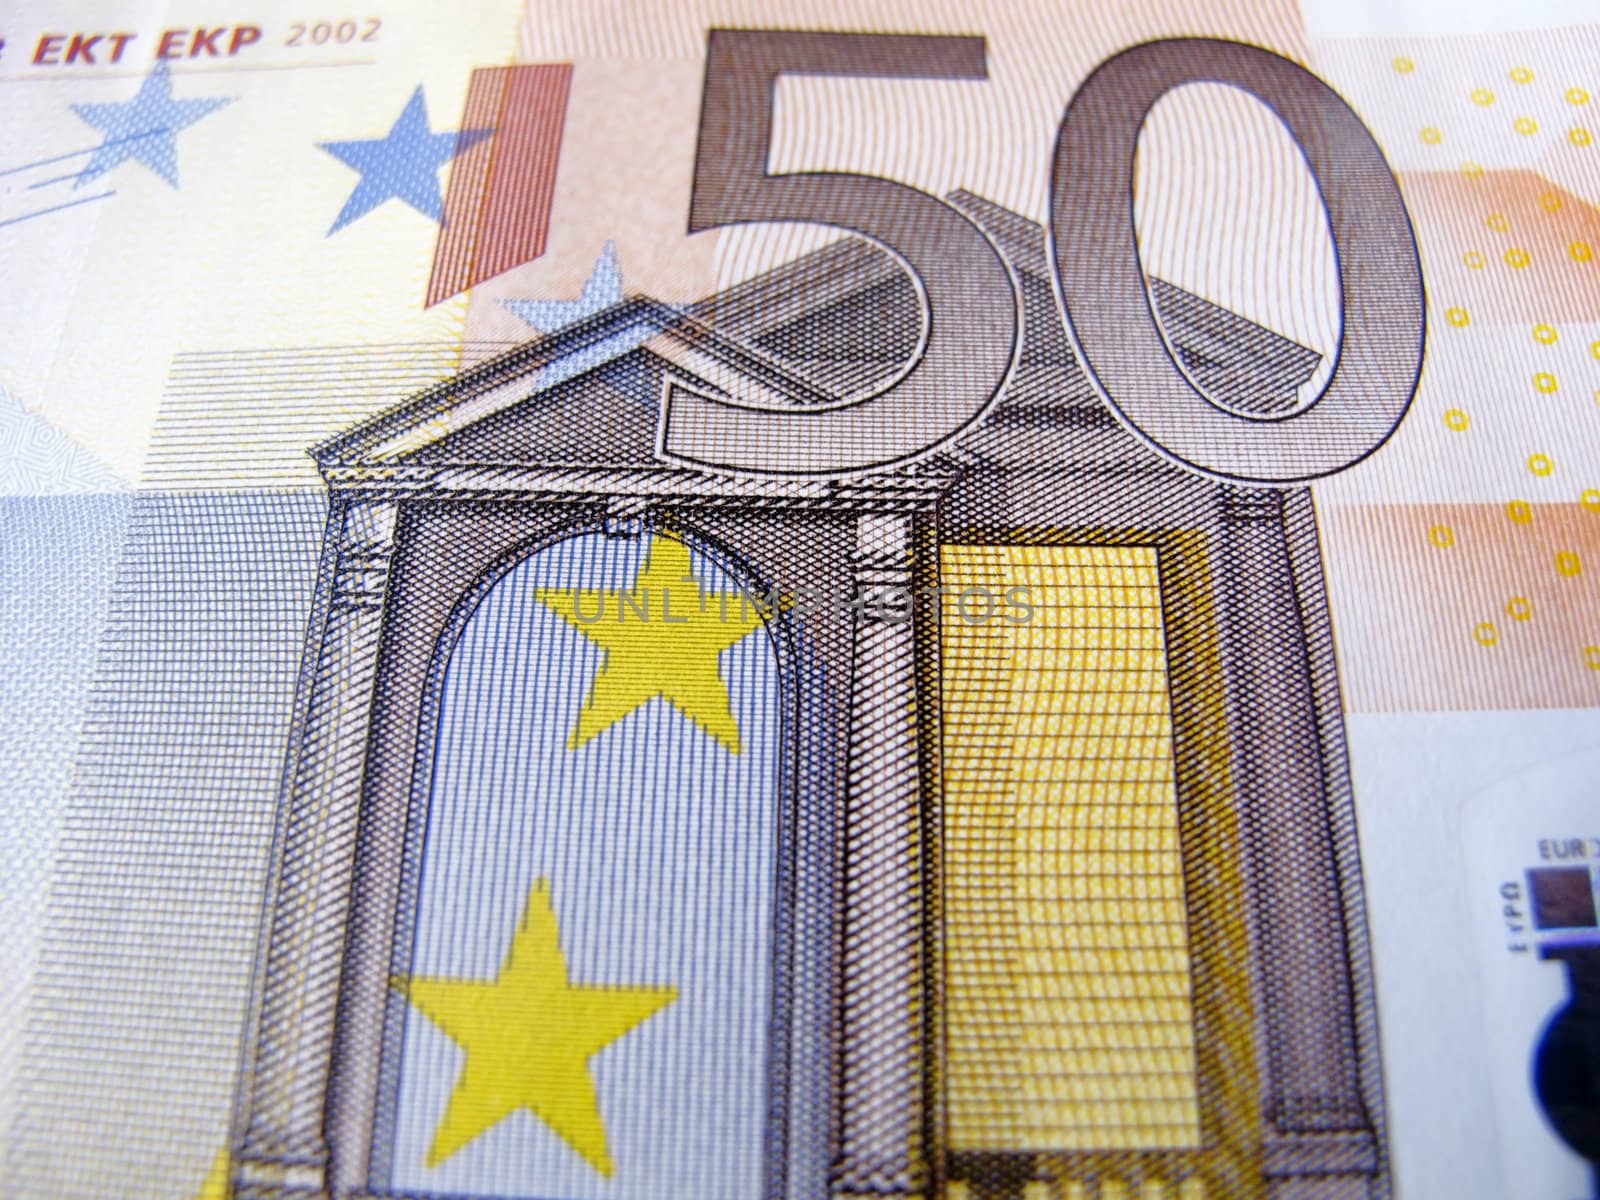 fifty euro by cspcsp